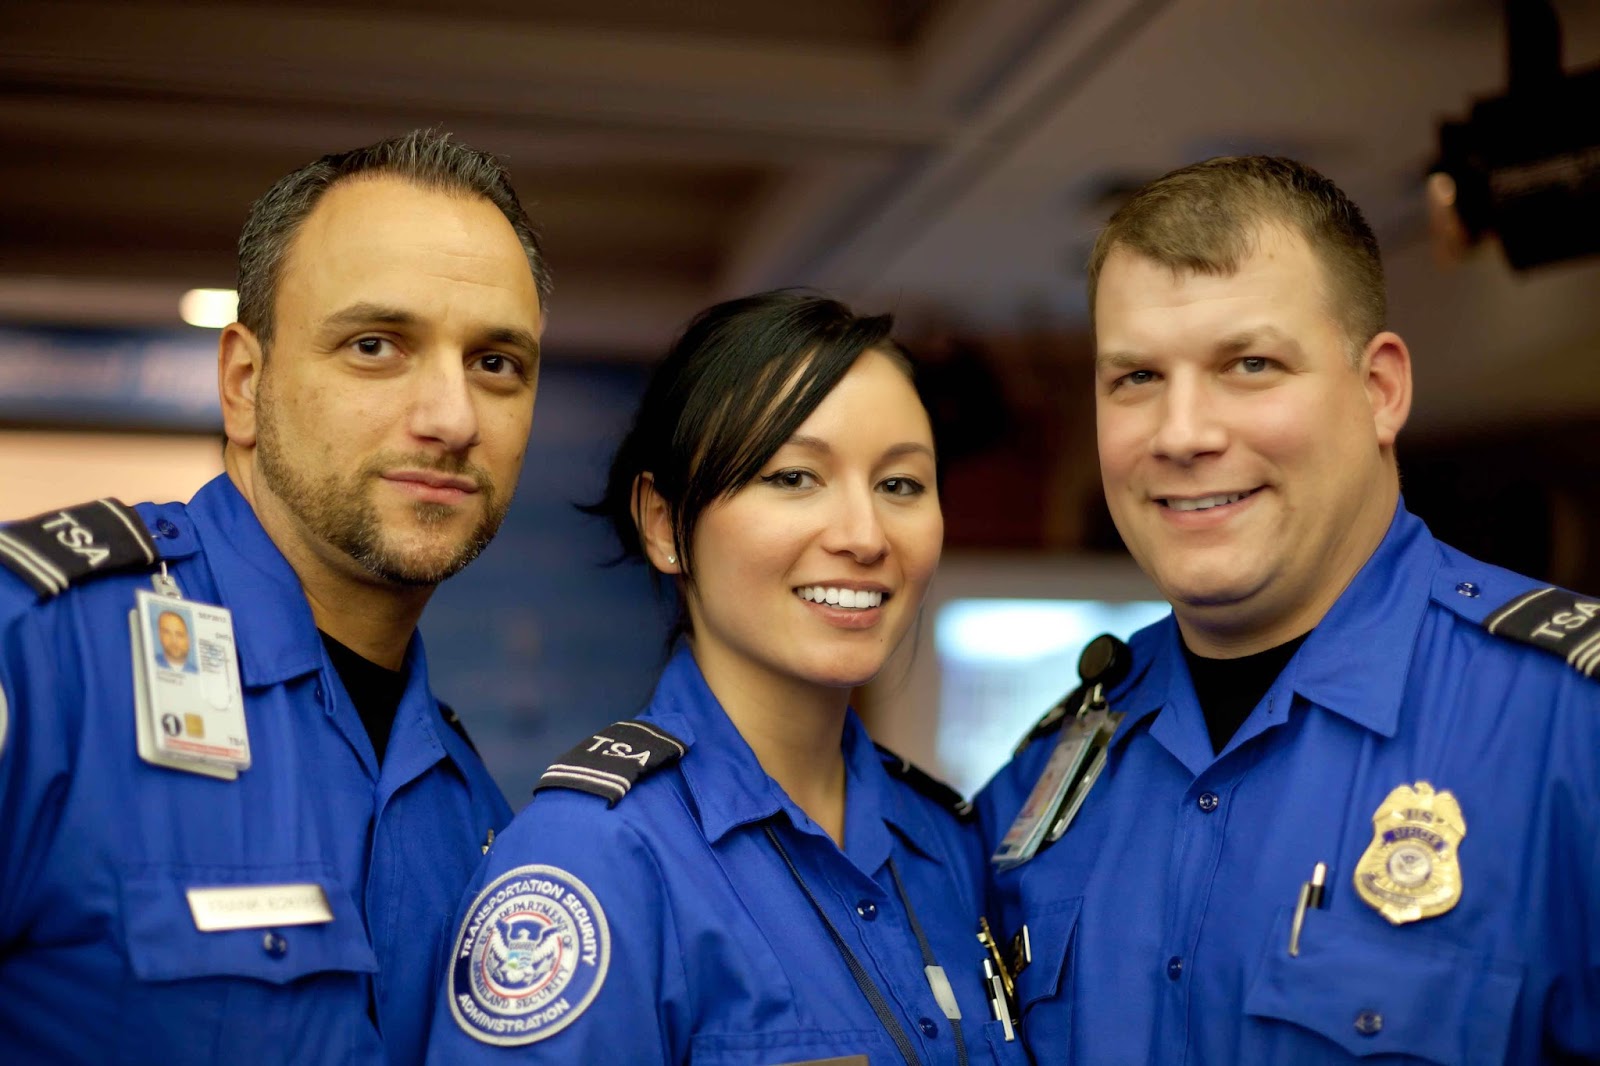 a group of people wearing blue uniforms